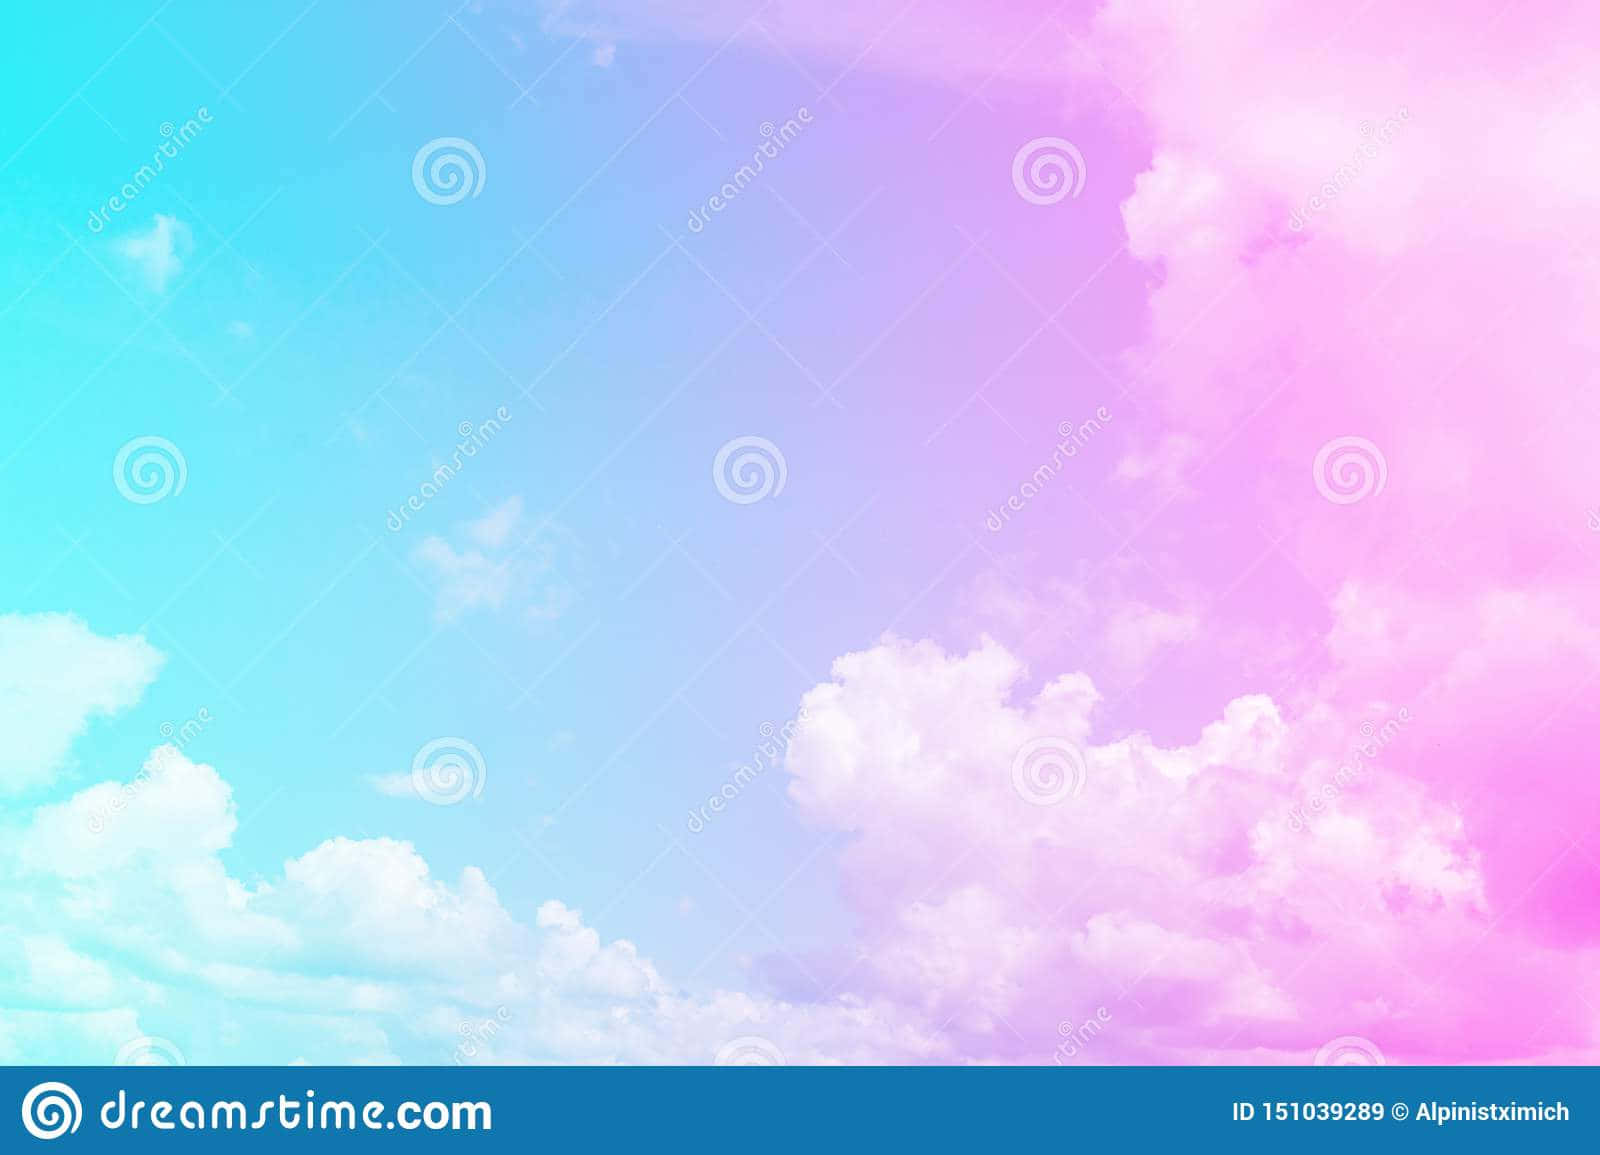 Pink And Blue Clouds With White Wallpaper